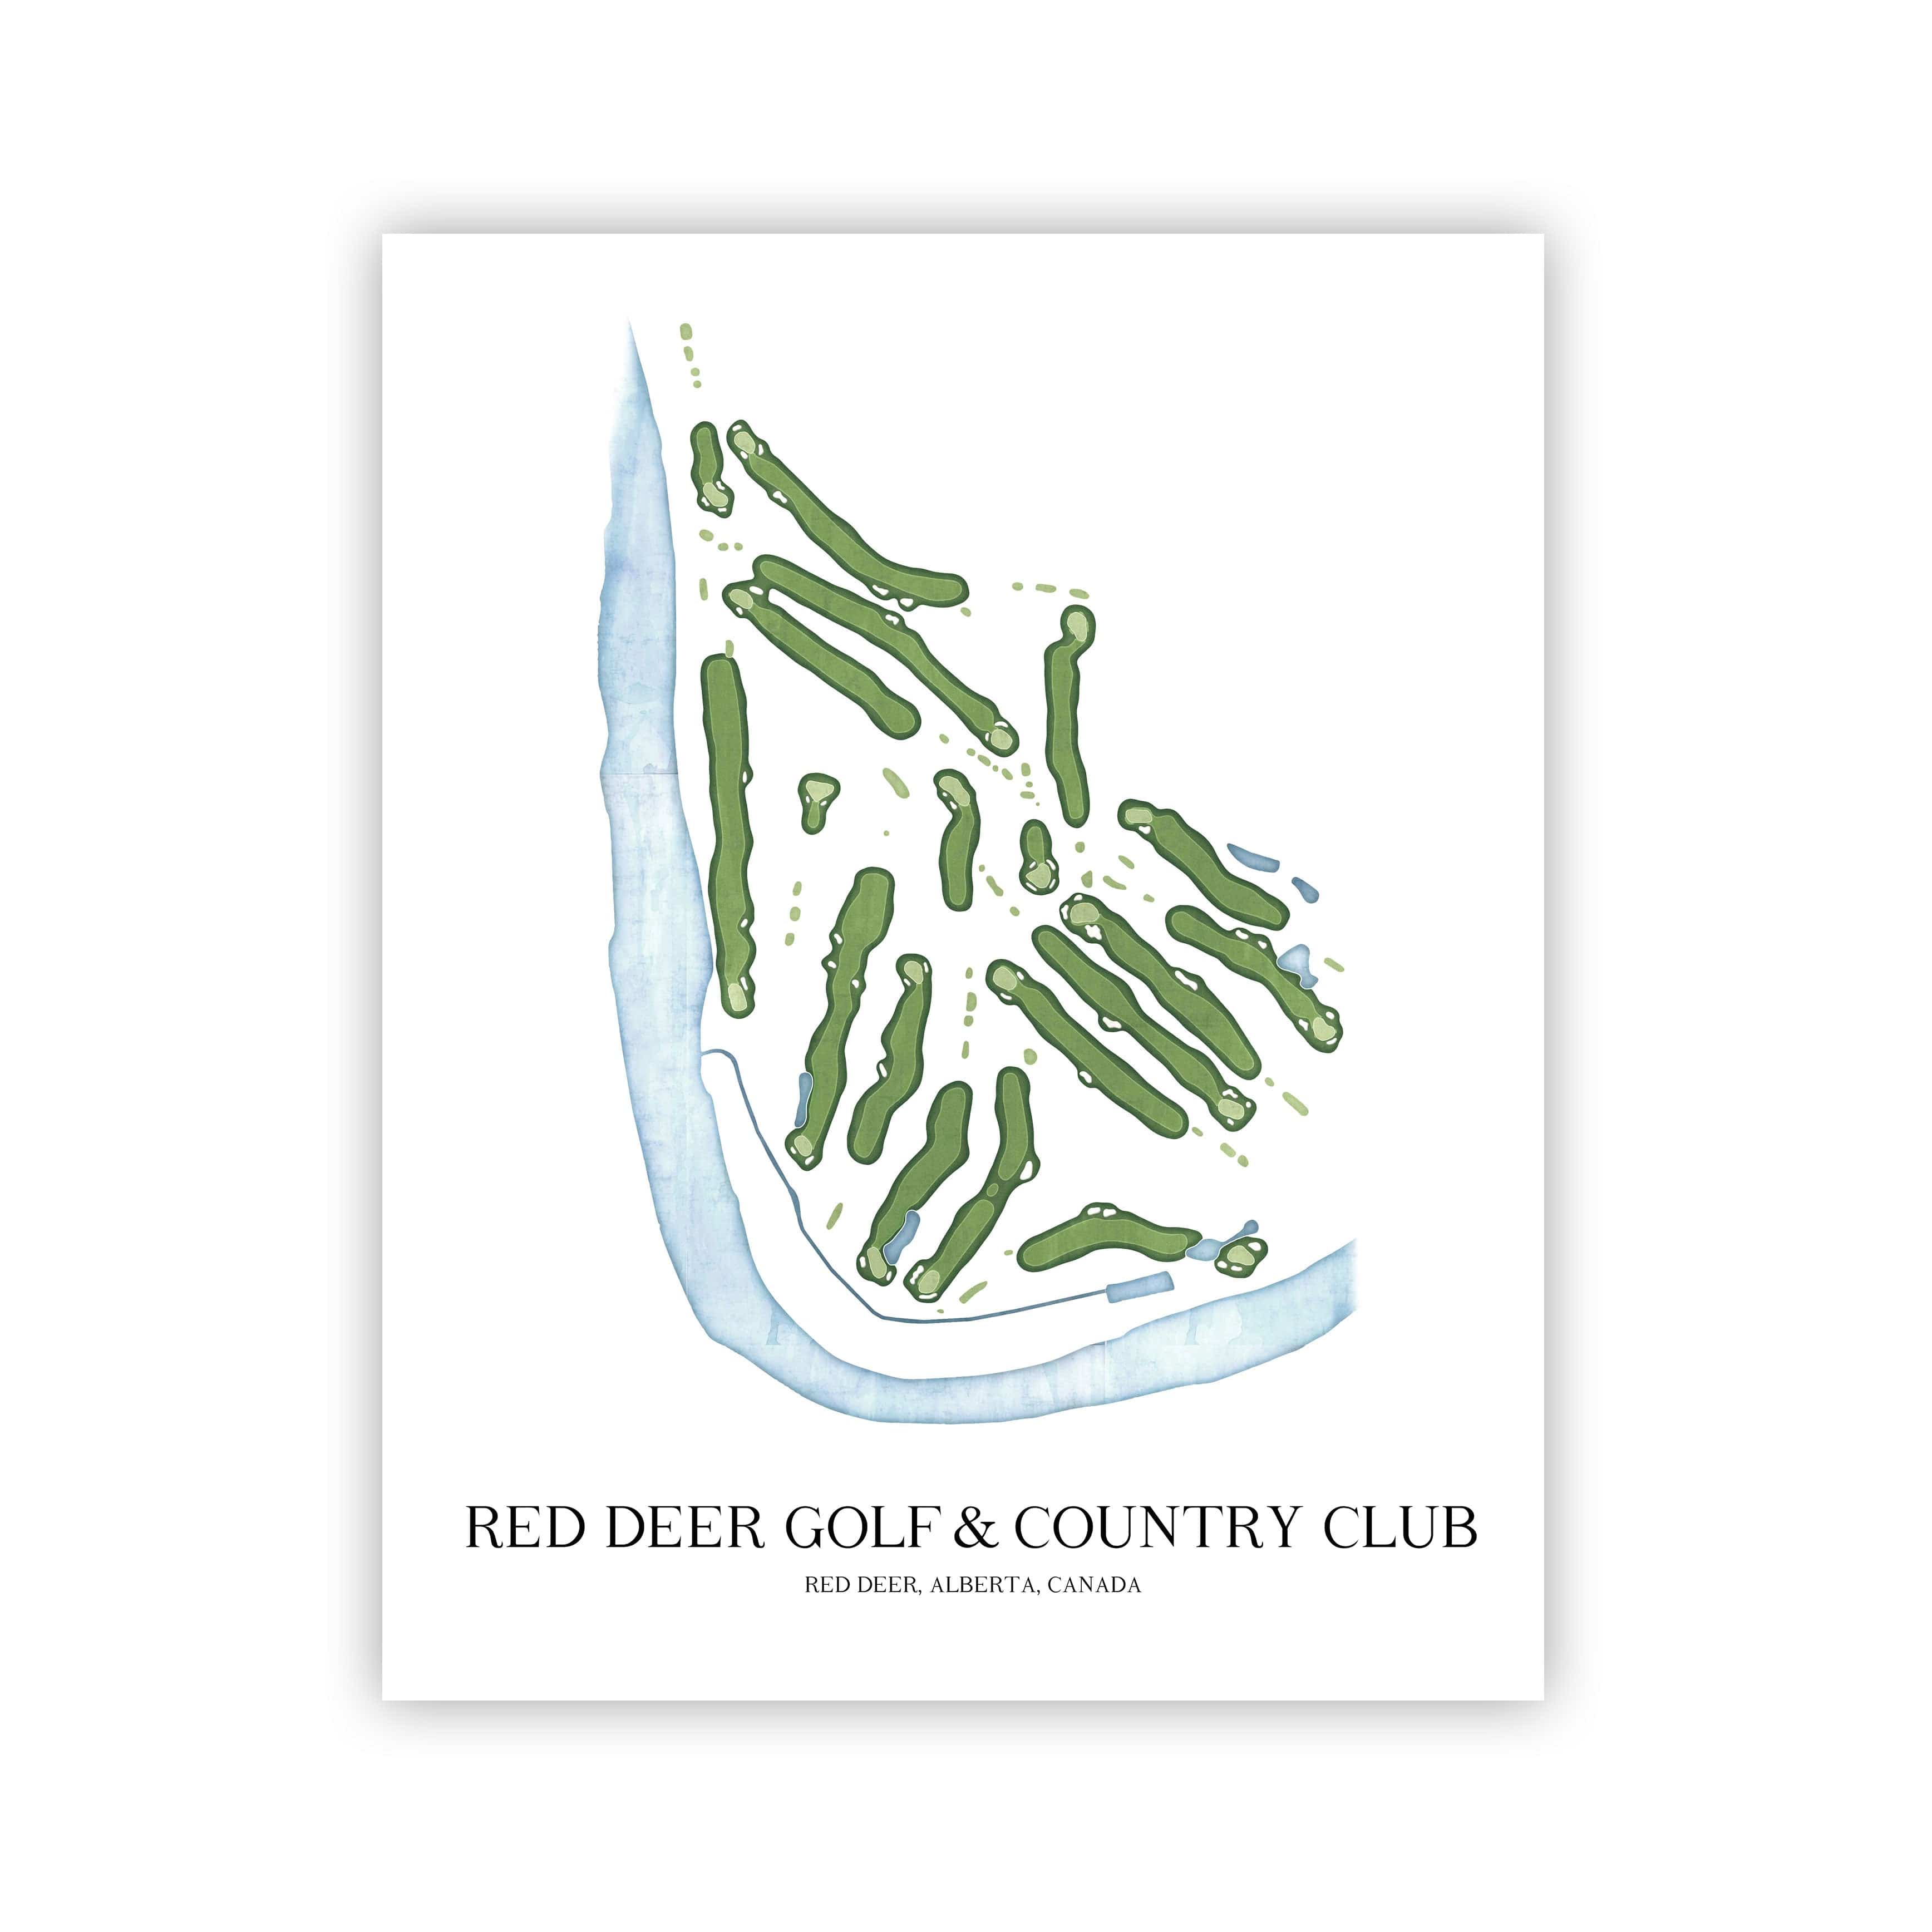 The 19th Hole Golf Shop - Golf Course Prints -  Red Deer Golf & Country Club Golf Course Map